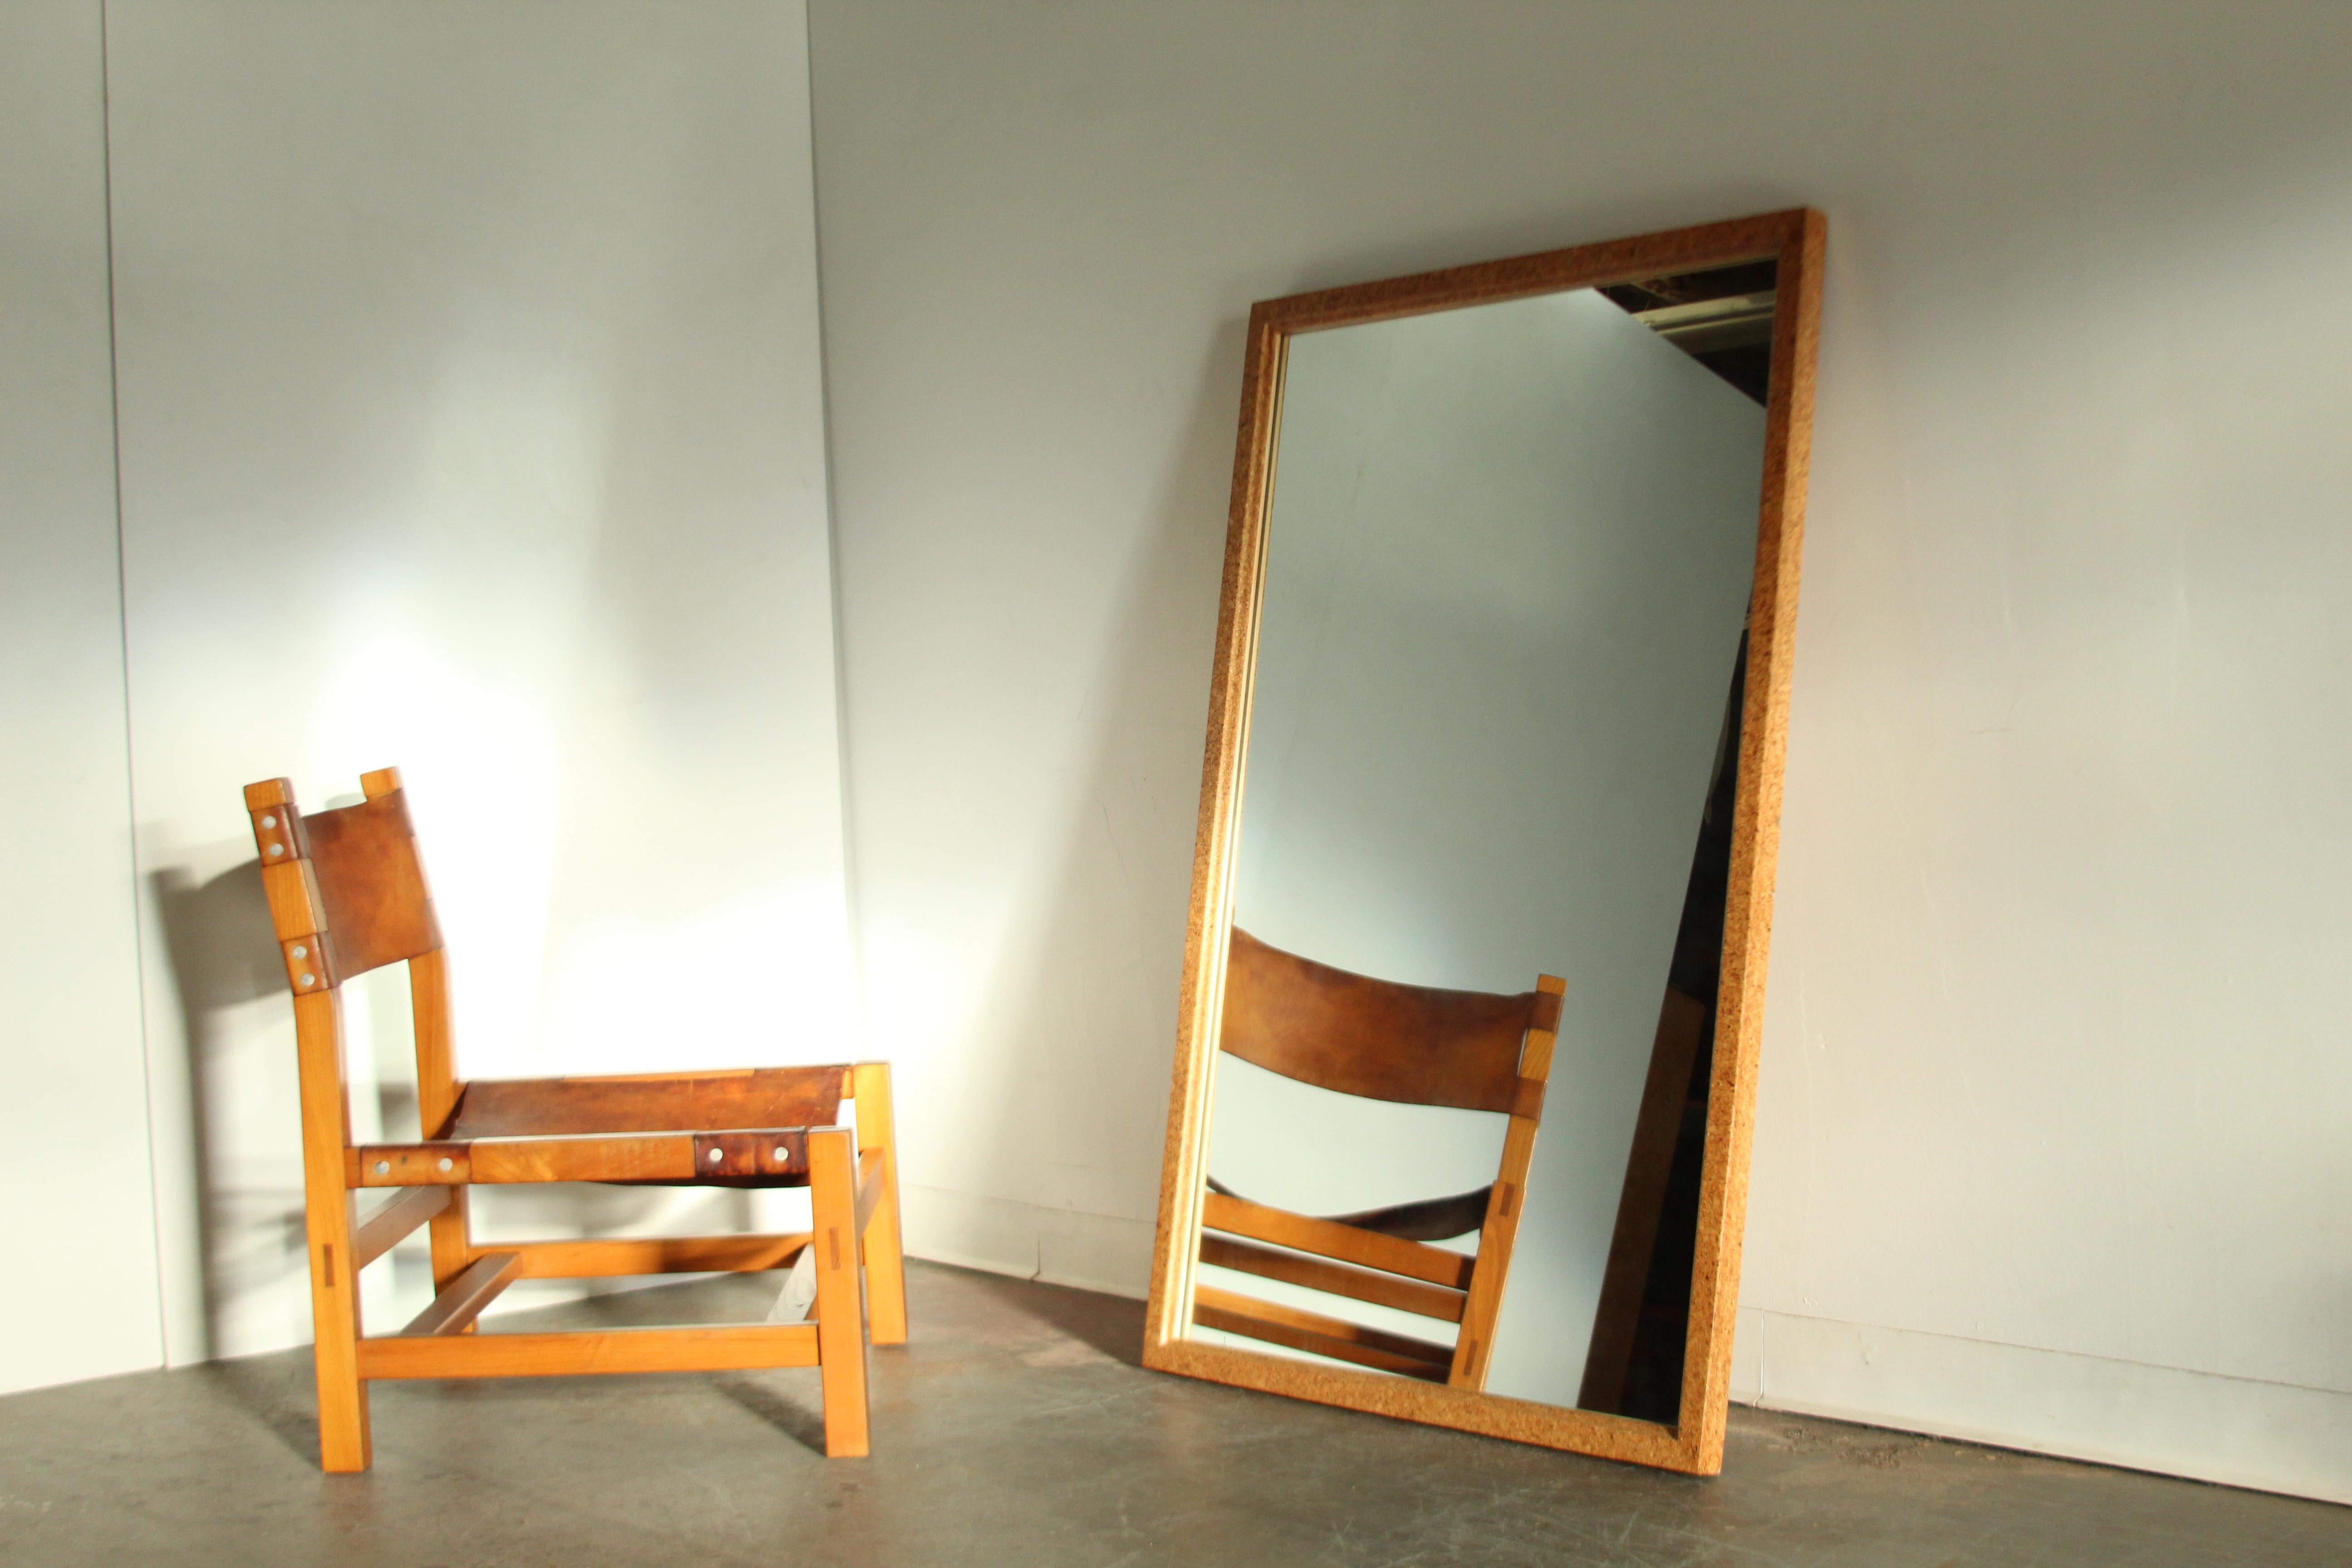 A large and uncommon solid cork mirror designed by Paul Frankl and manufactured by Johnson Furniture in the 1950s. The large piece was intended to be hung on a wall and is equipped with the original horizontal hanging hardware (it could easily be